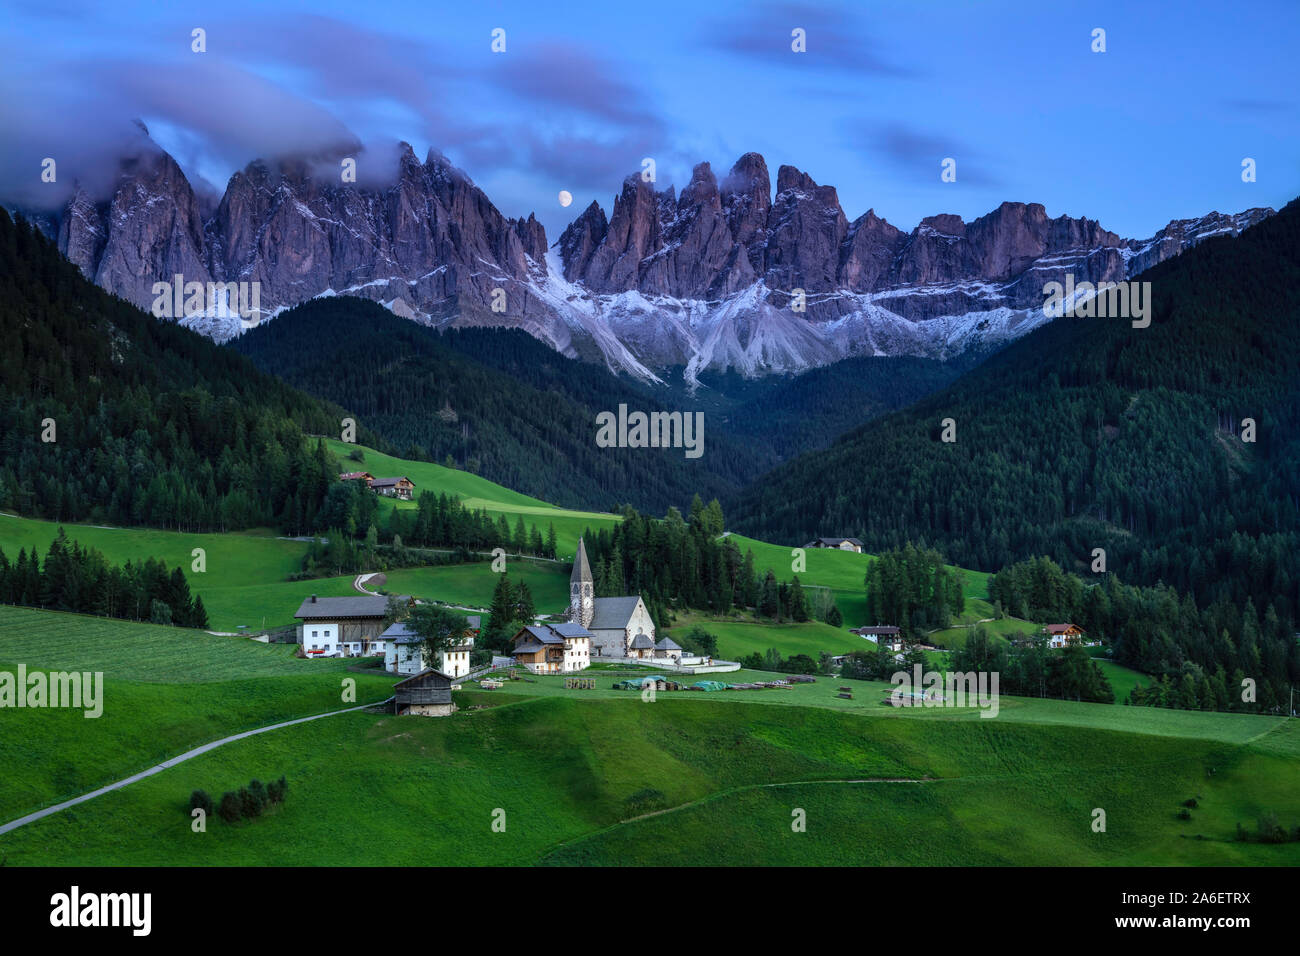 Moon rise over the Santa Magdalena church of the Val di Funes in the Dolomites, Italy Stock Photo